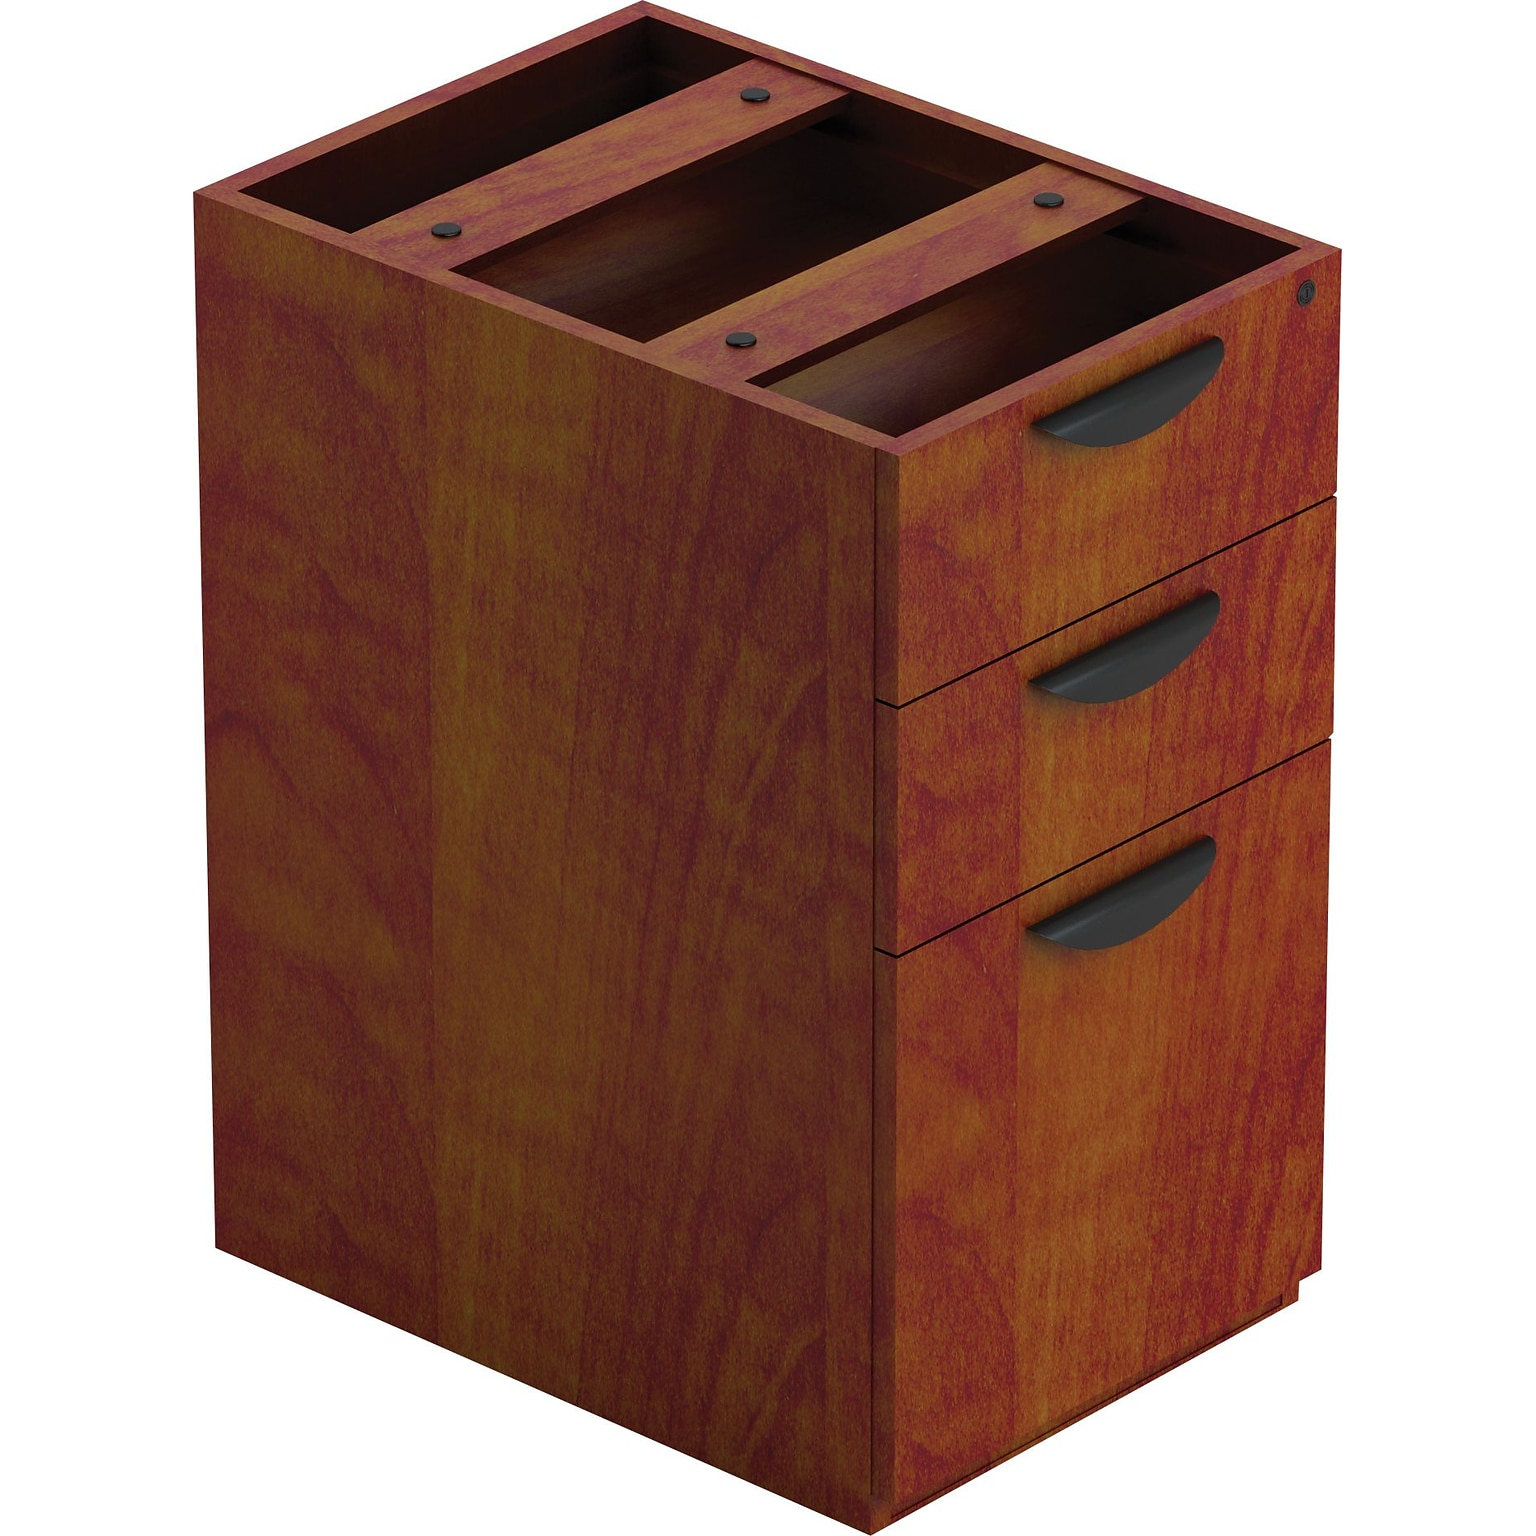 Offices To Go Furniture Collection Pedestal File, Box/Box/File, American Dark Cherry (TDSL22BBFADC)